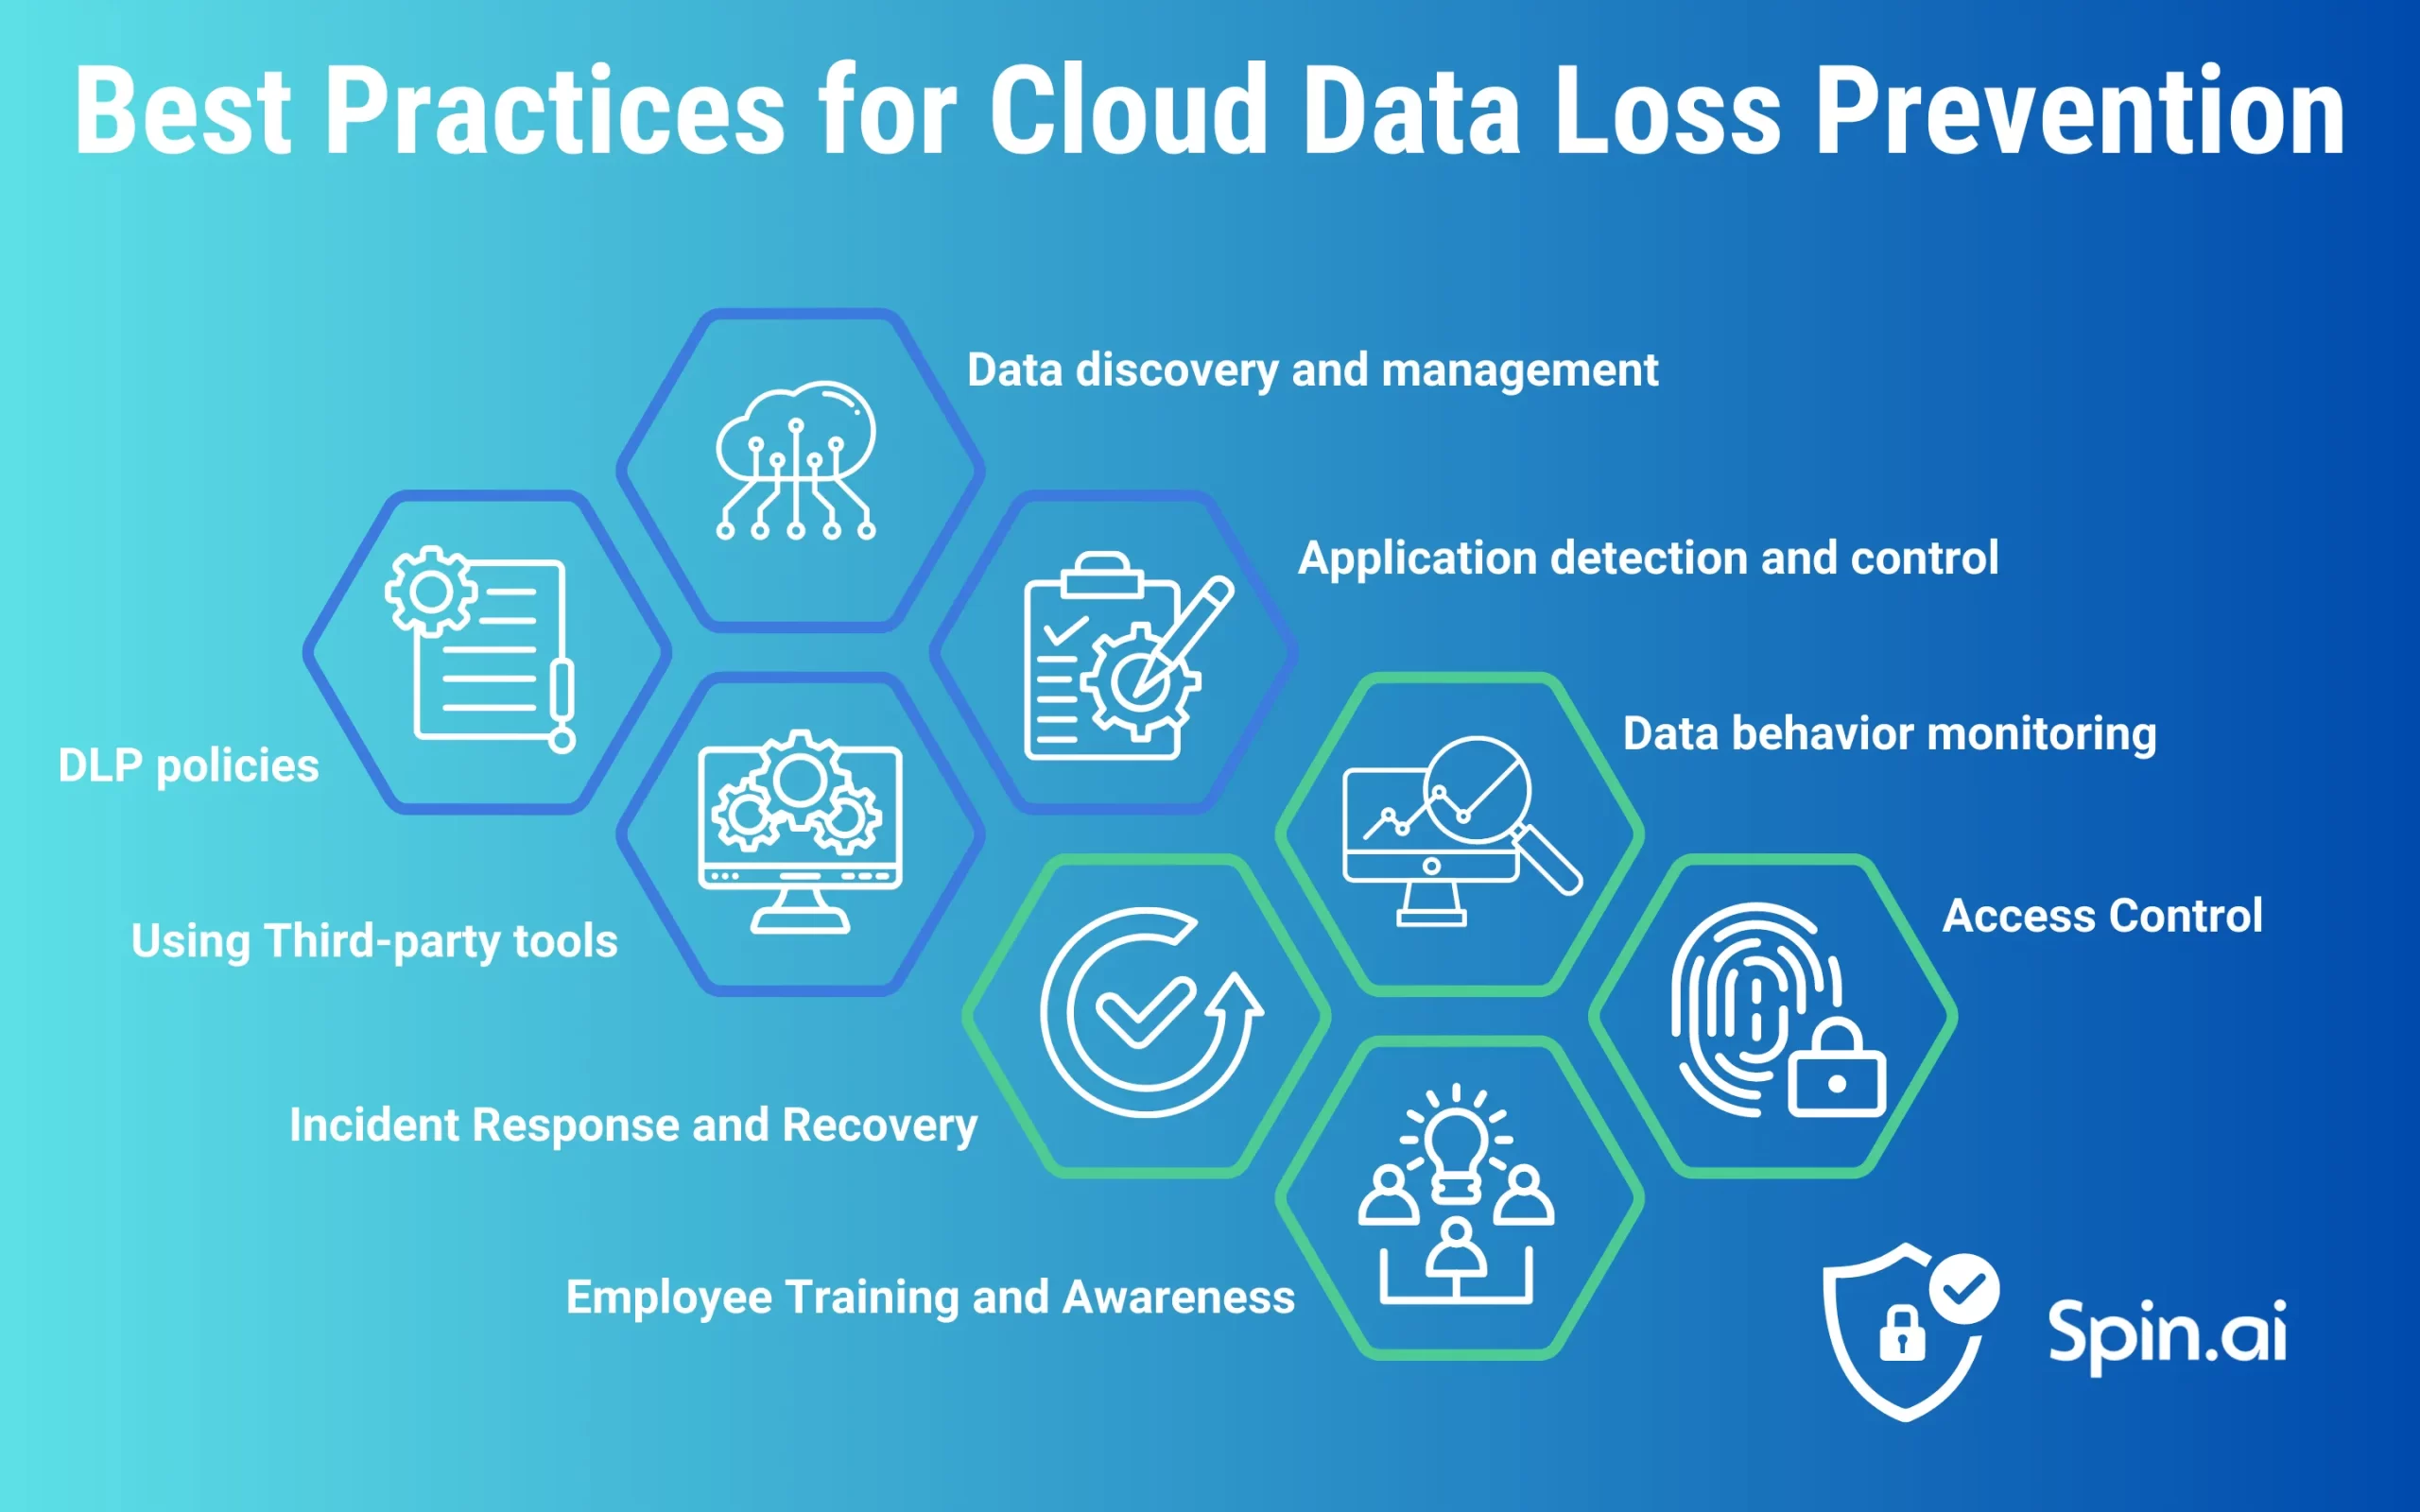 Data Loss Prevention Best Practices for the Cloud